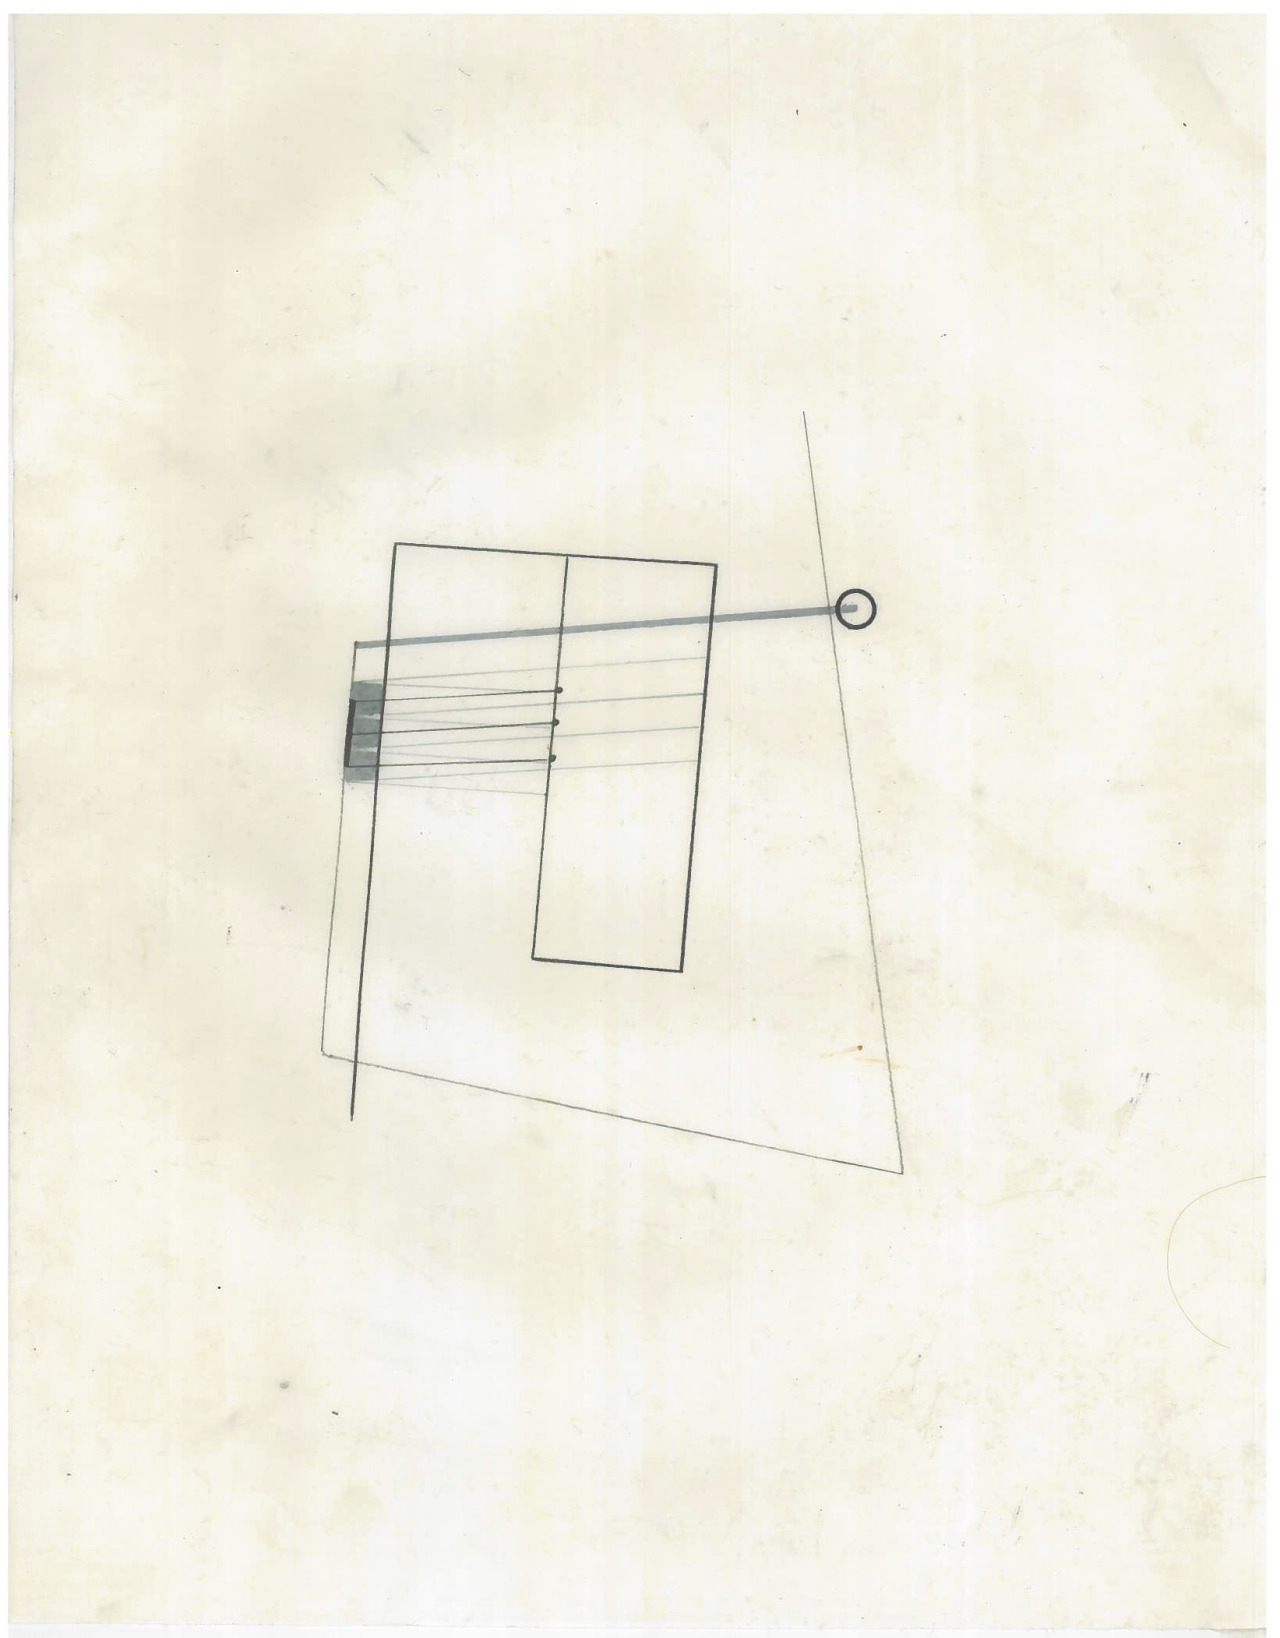 Untitled (the city, observations 17B)  Pencil on oiled fabriano paper  279mm x 216mm  December 2013